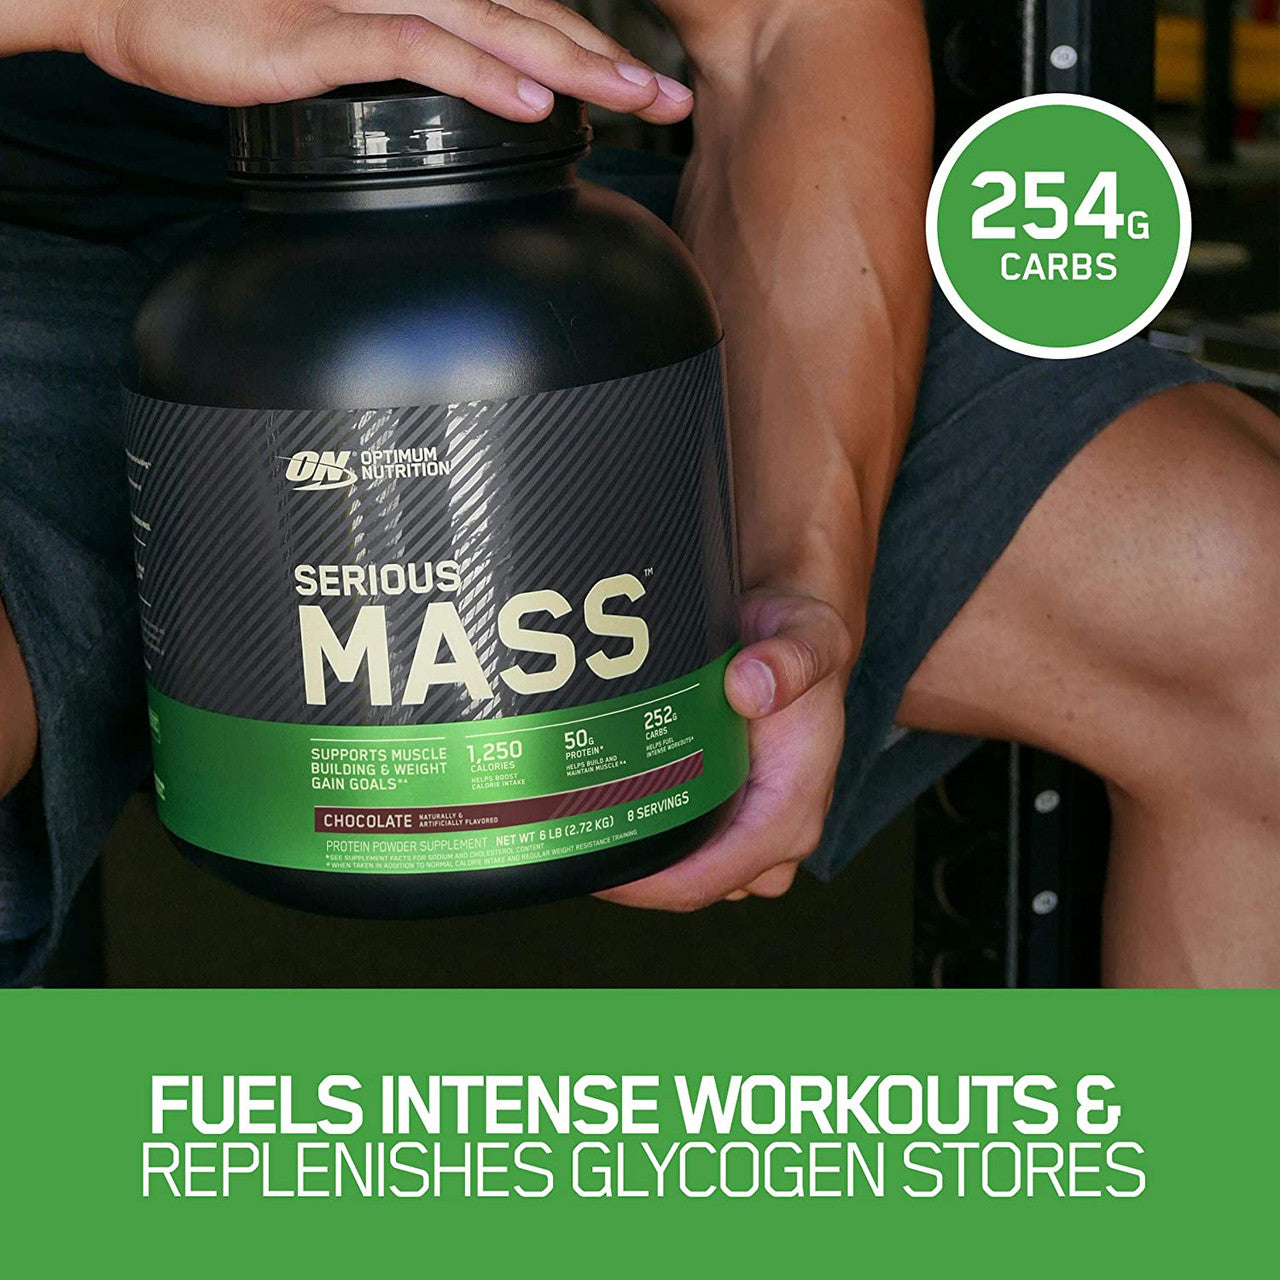 Optimum Nutrition Serious Mass Product Highlights Fuels Intense Workouts infographic